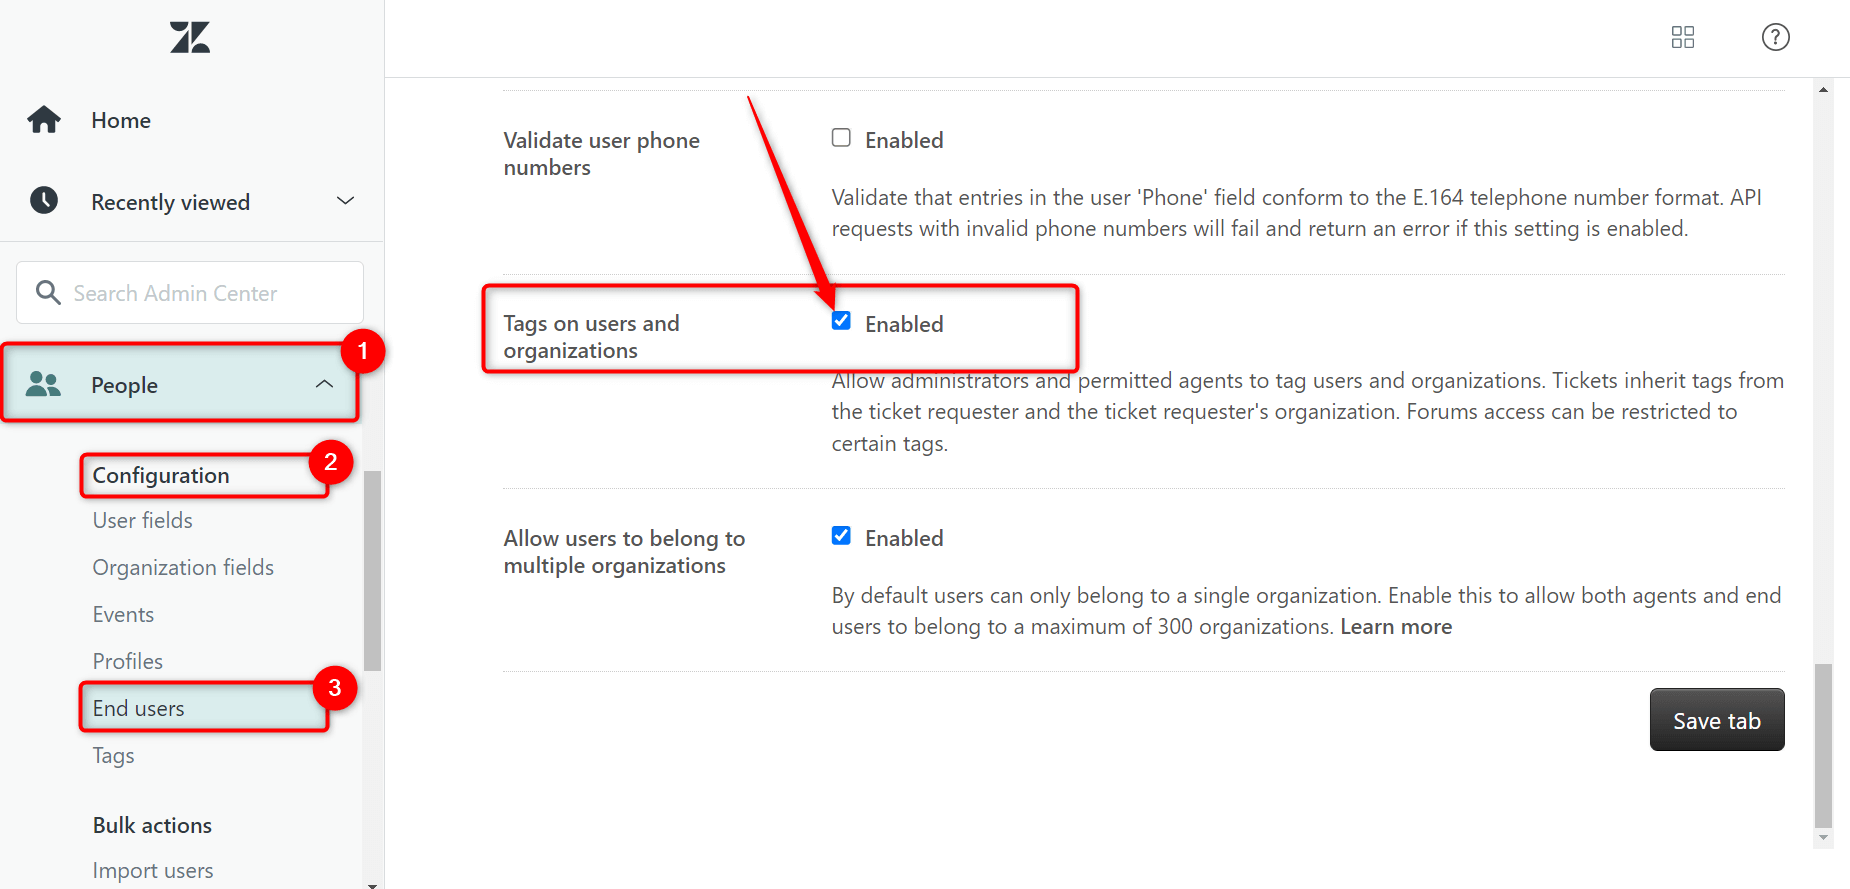 Enable Tags On Users